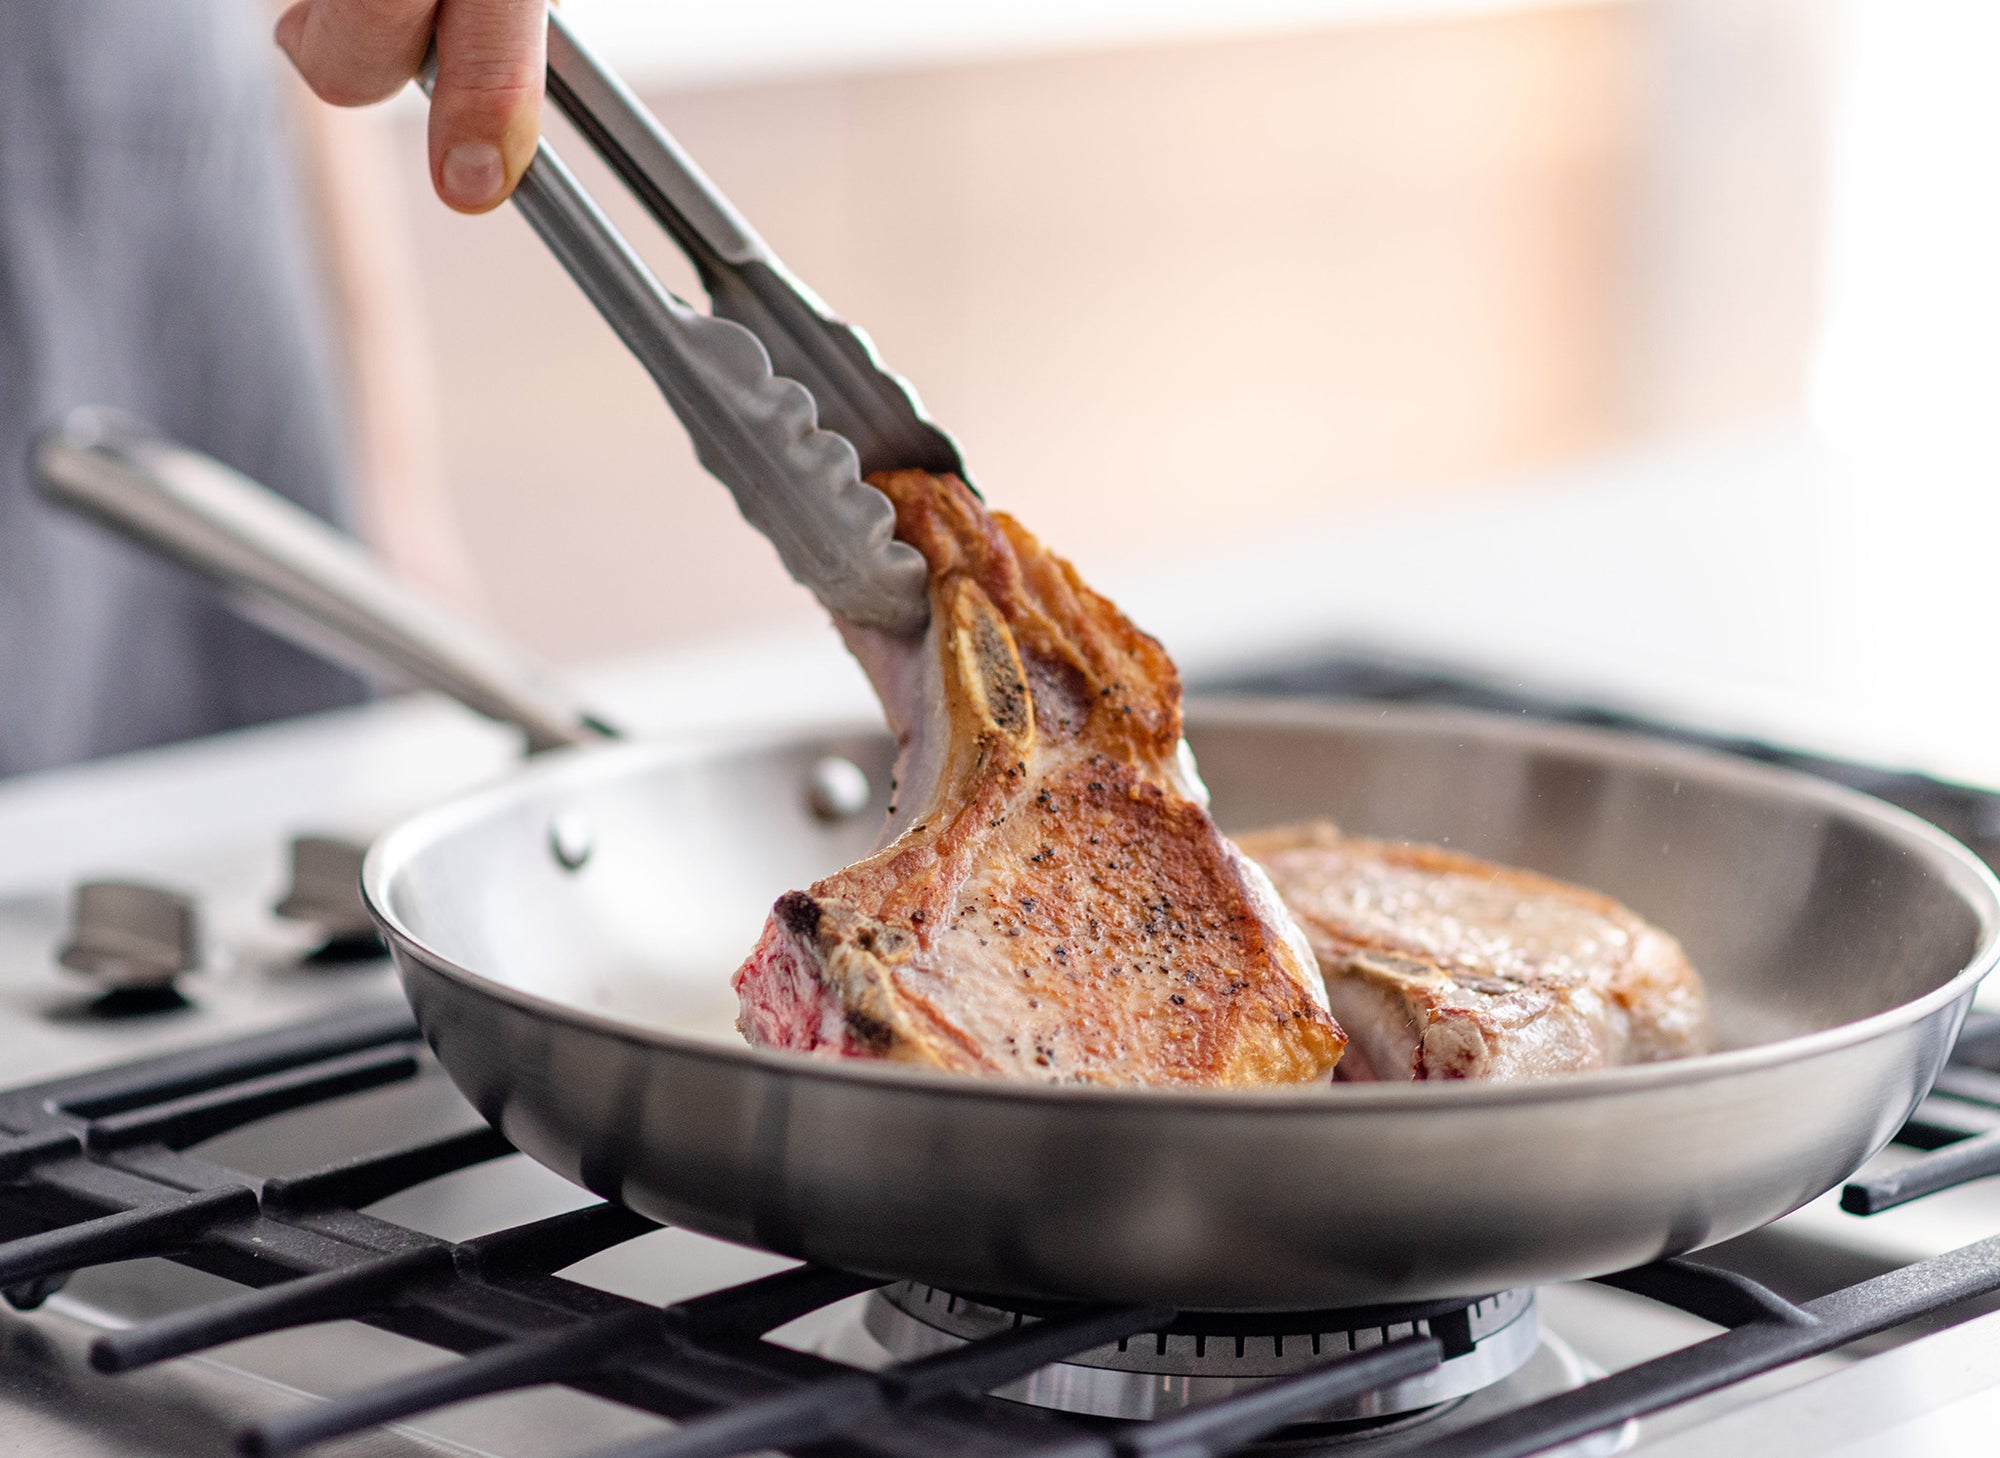 A pair of hands uses tongs to flip a seared bone-in pork chop in a Misen Stainless Steel Pan on a stovetop.